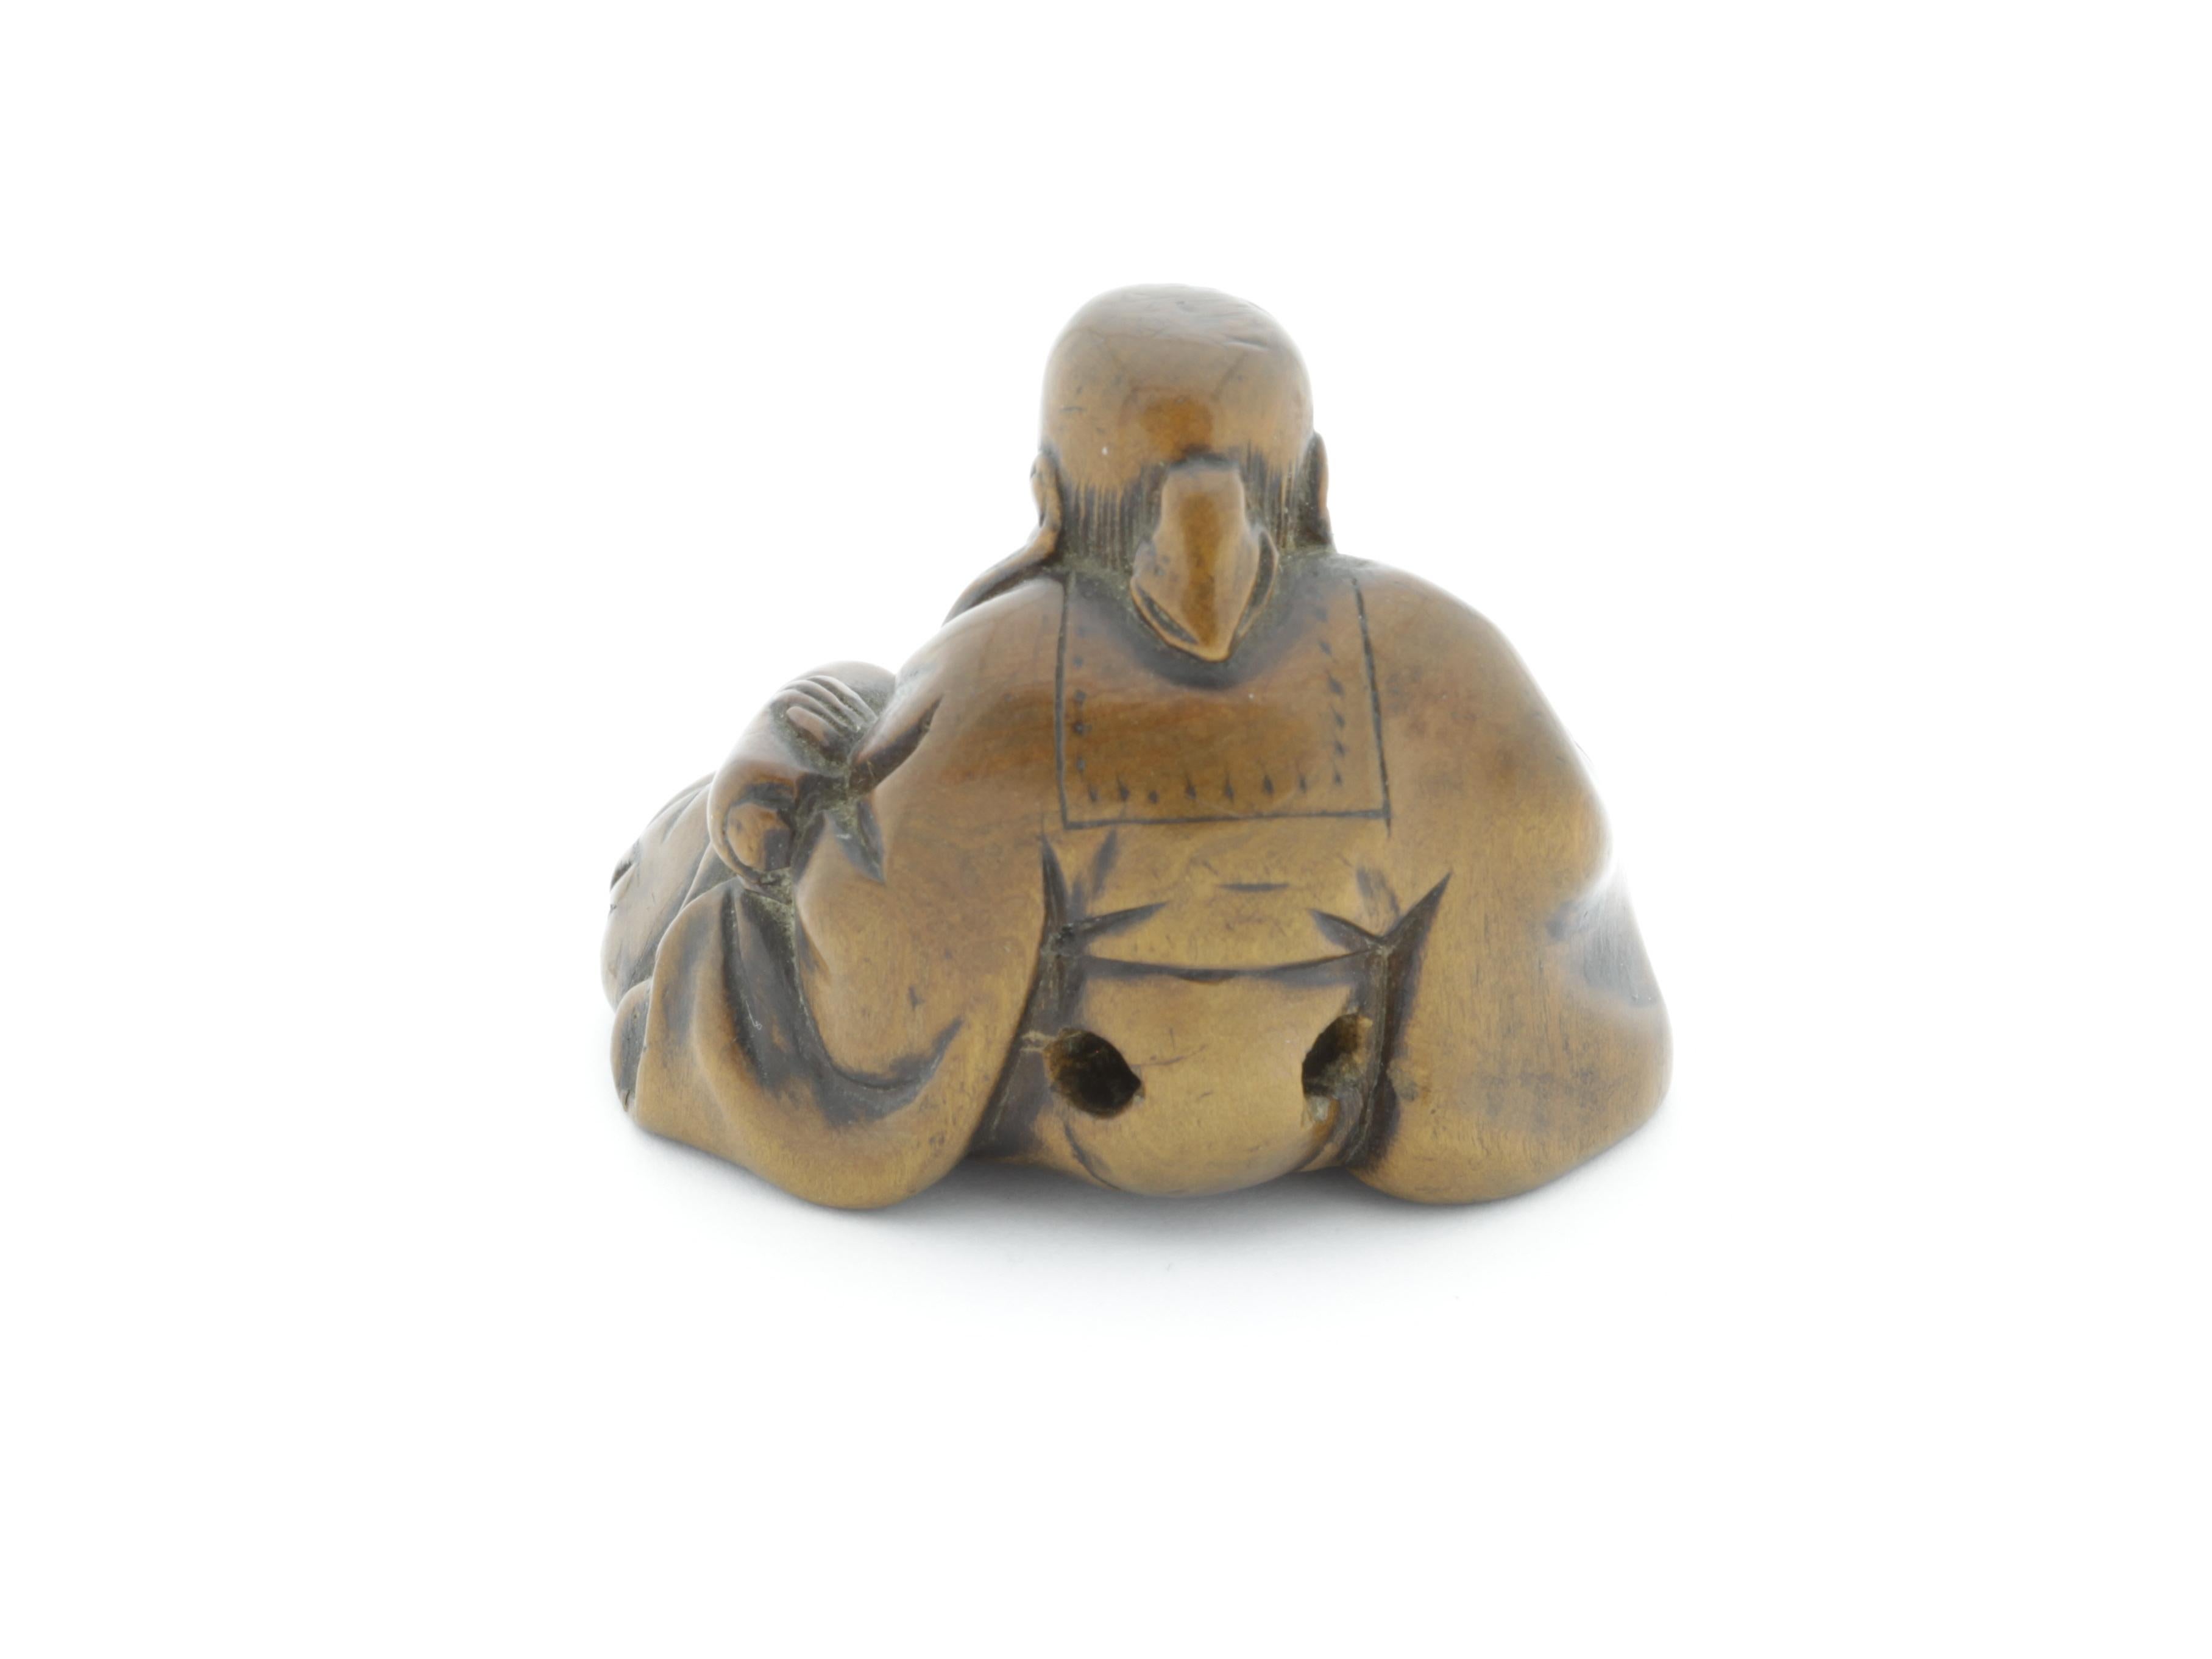 This netsuke is made entirely out of wood and shows one of the Seven Gods of Fortune, Fukurokuju. He is the deity of wisdom, good luck, happiness, wealth, virility and longevity. In here, he is holding a scroll with his left hand and is looking at a